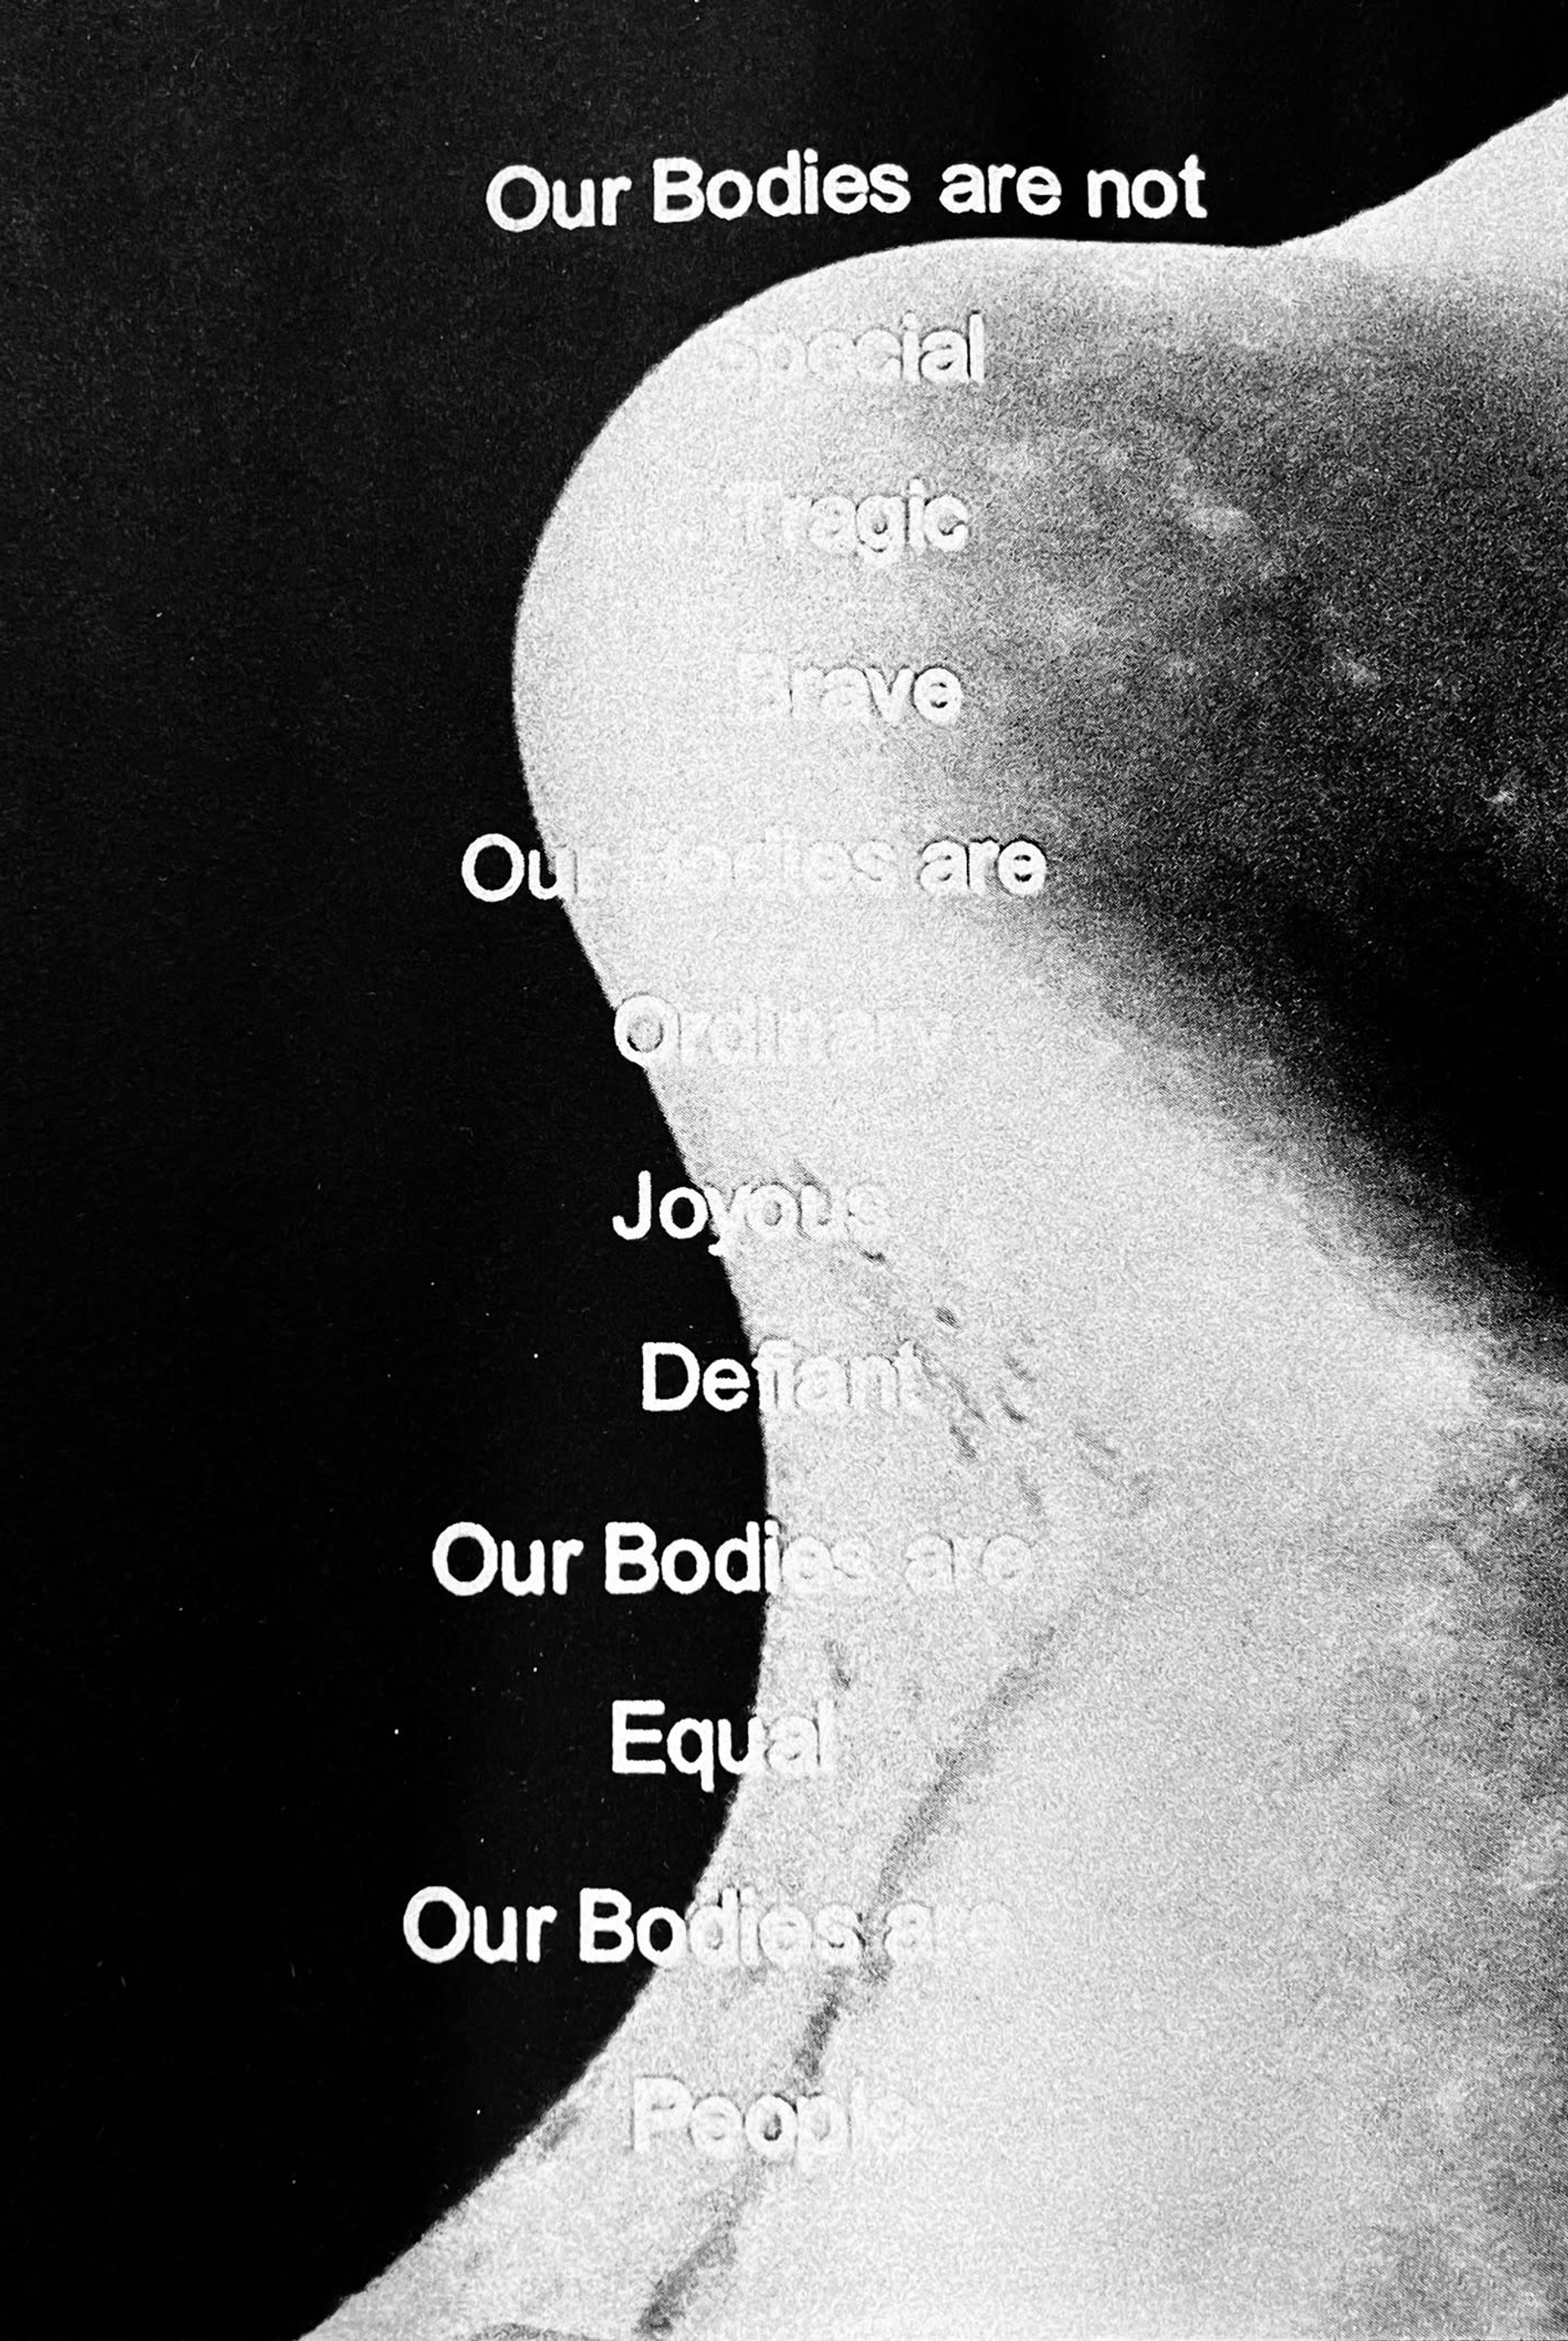 Grainy black and white photograph of the edge of a curved solid shape, against a black background, with short lines of white text running top to bottom of the image. By Mandi Stewart